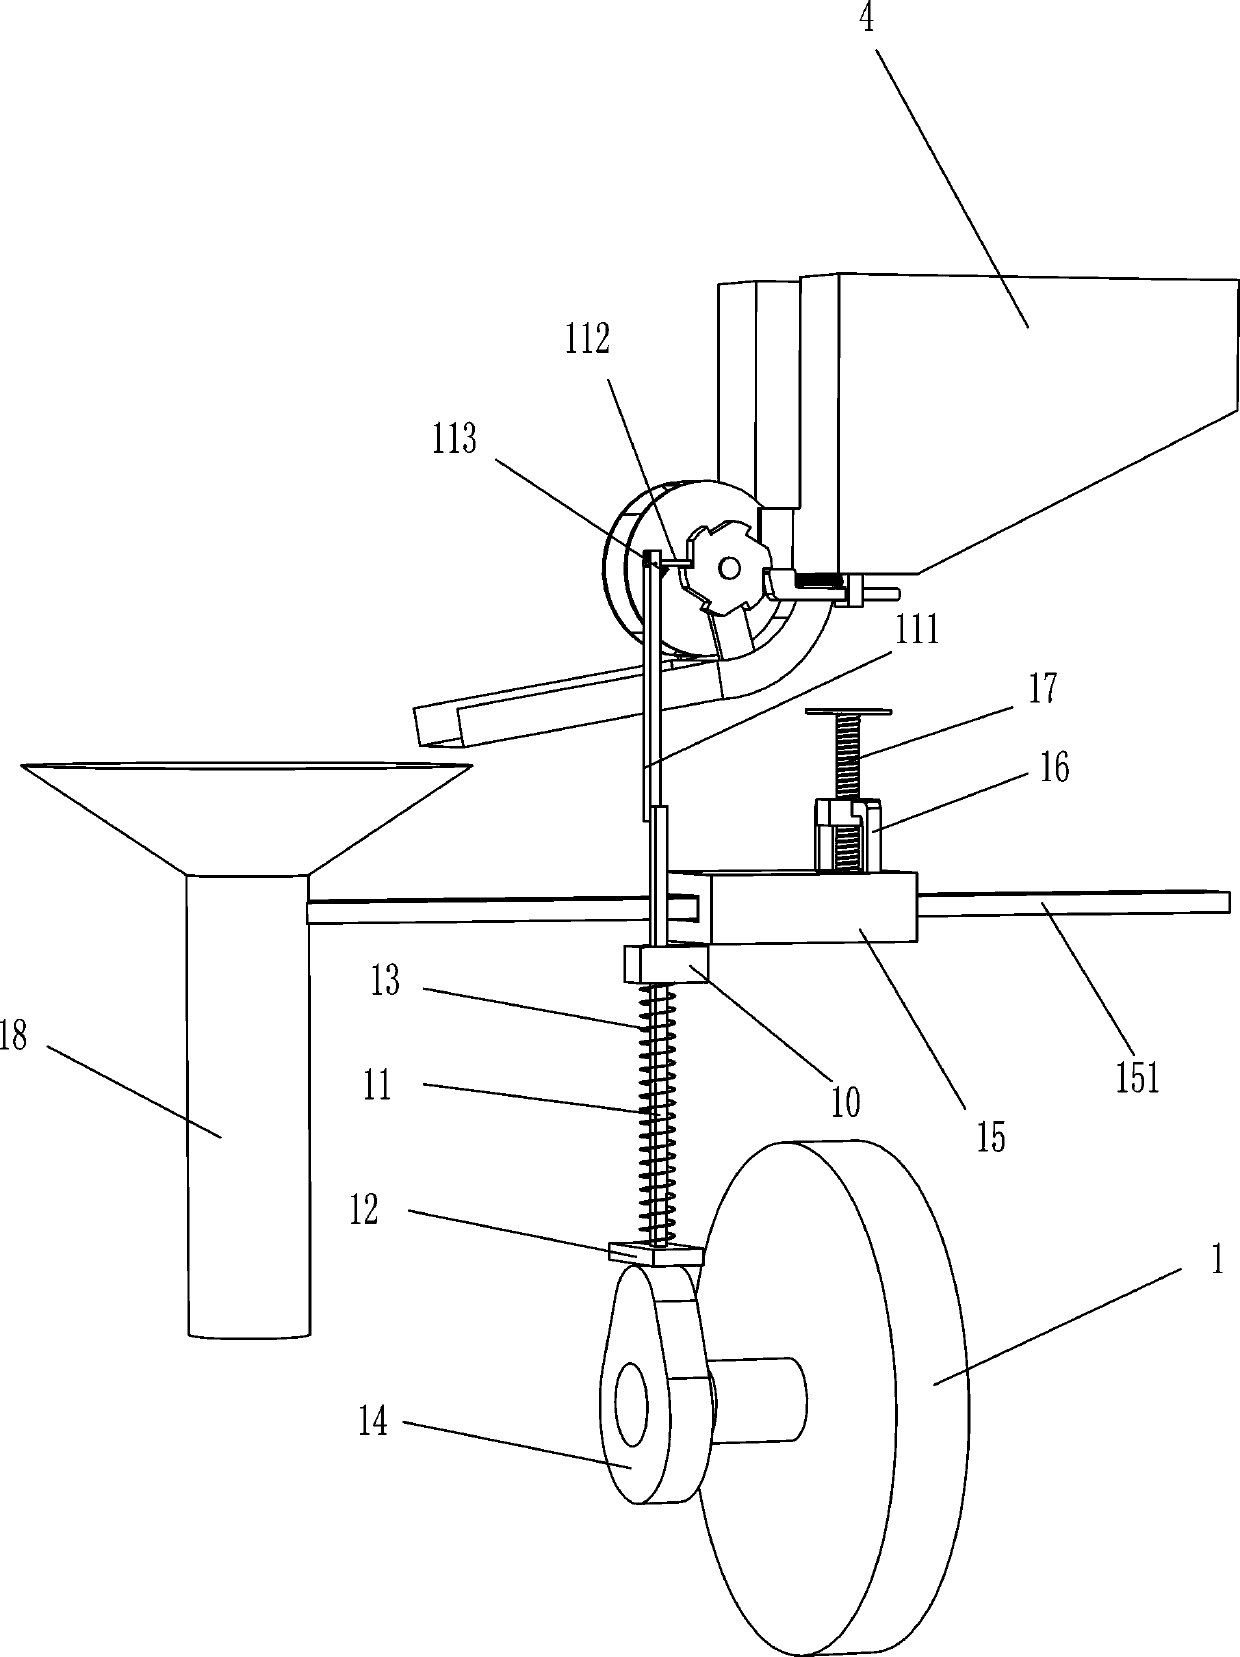 Hand-push-type positioned seeding device for peanut planting